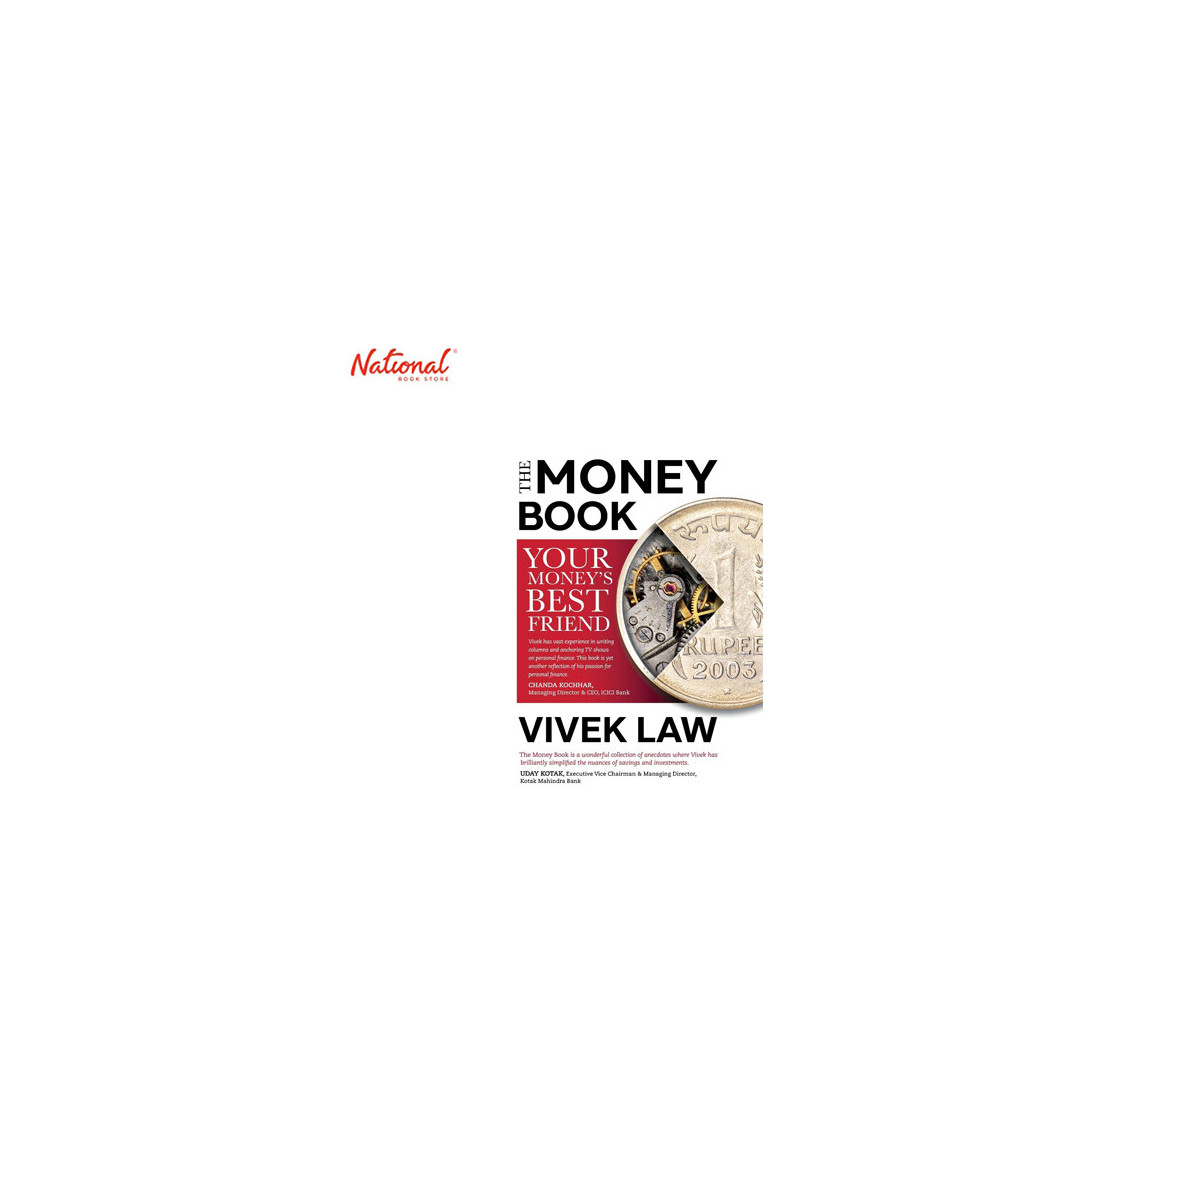 The Money Book: Your Money's Best Friend Hardcover by Vivek Law